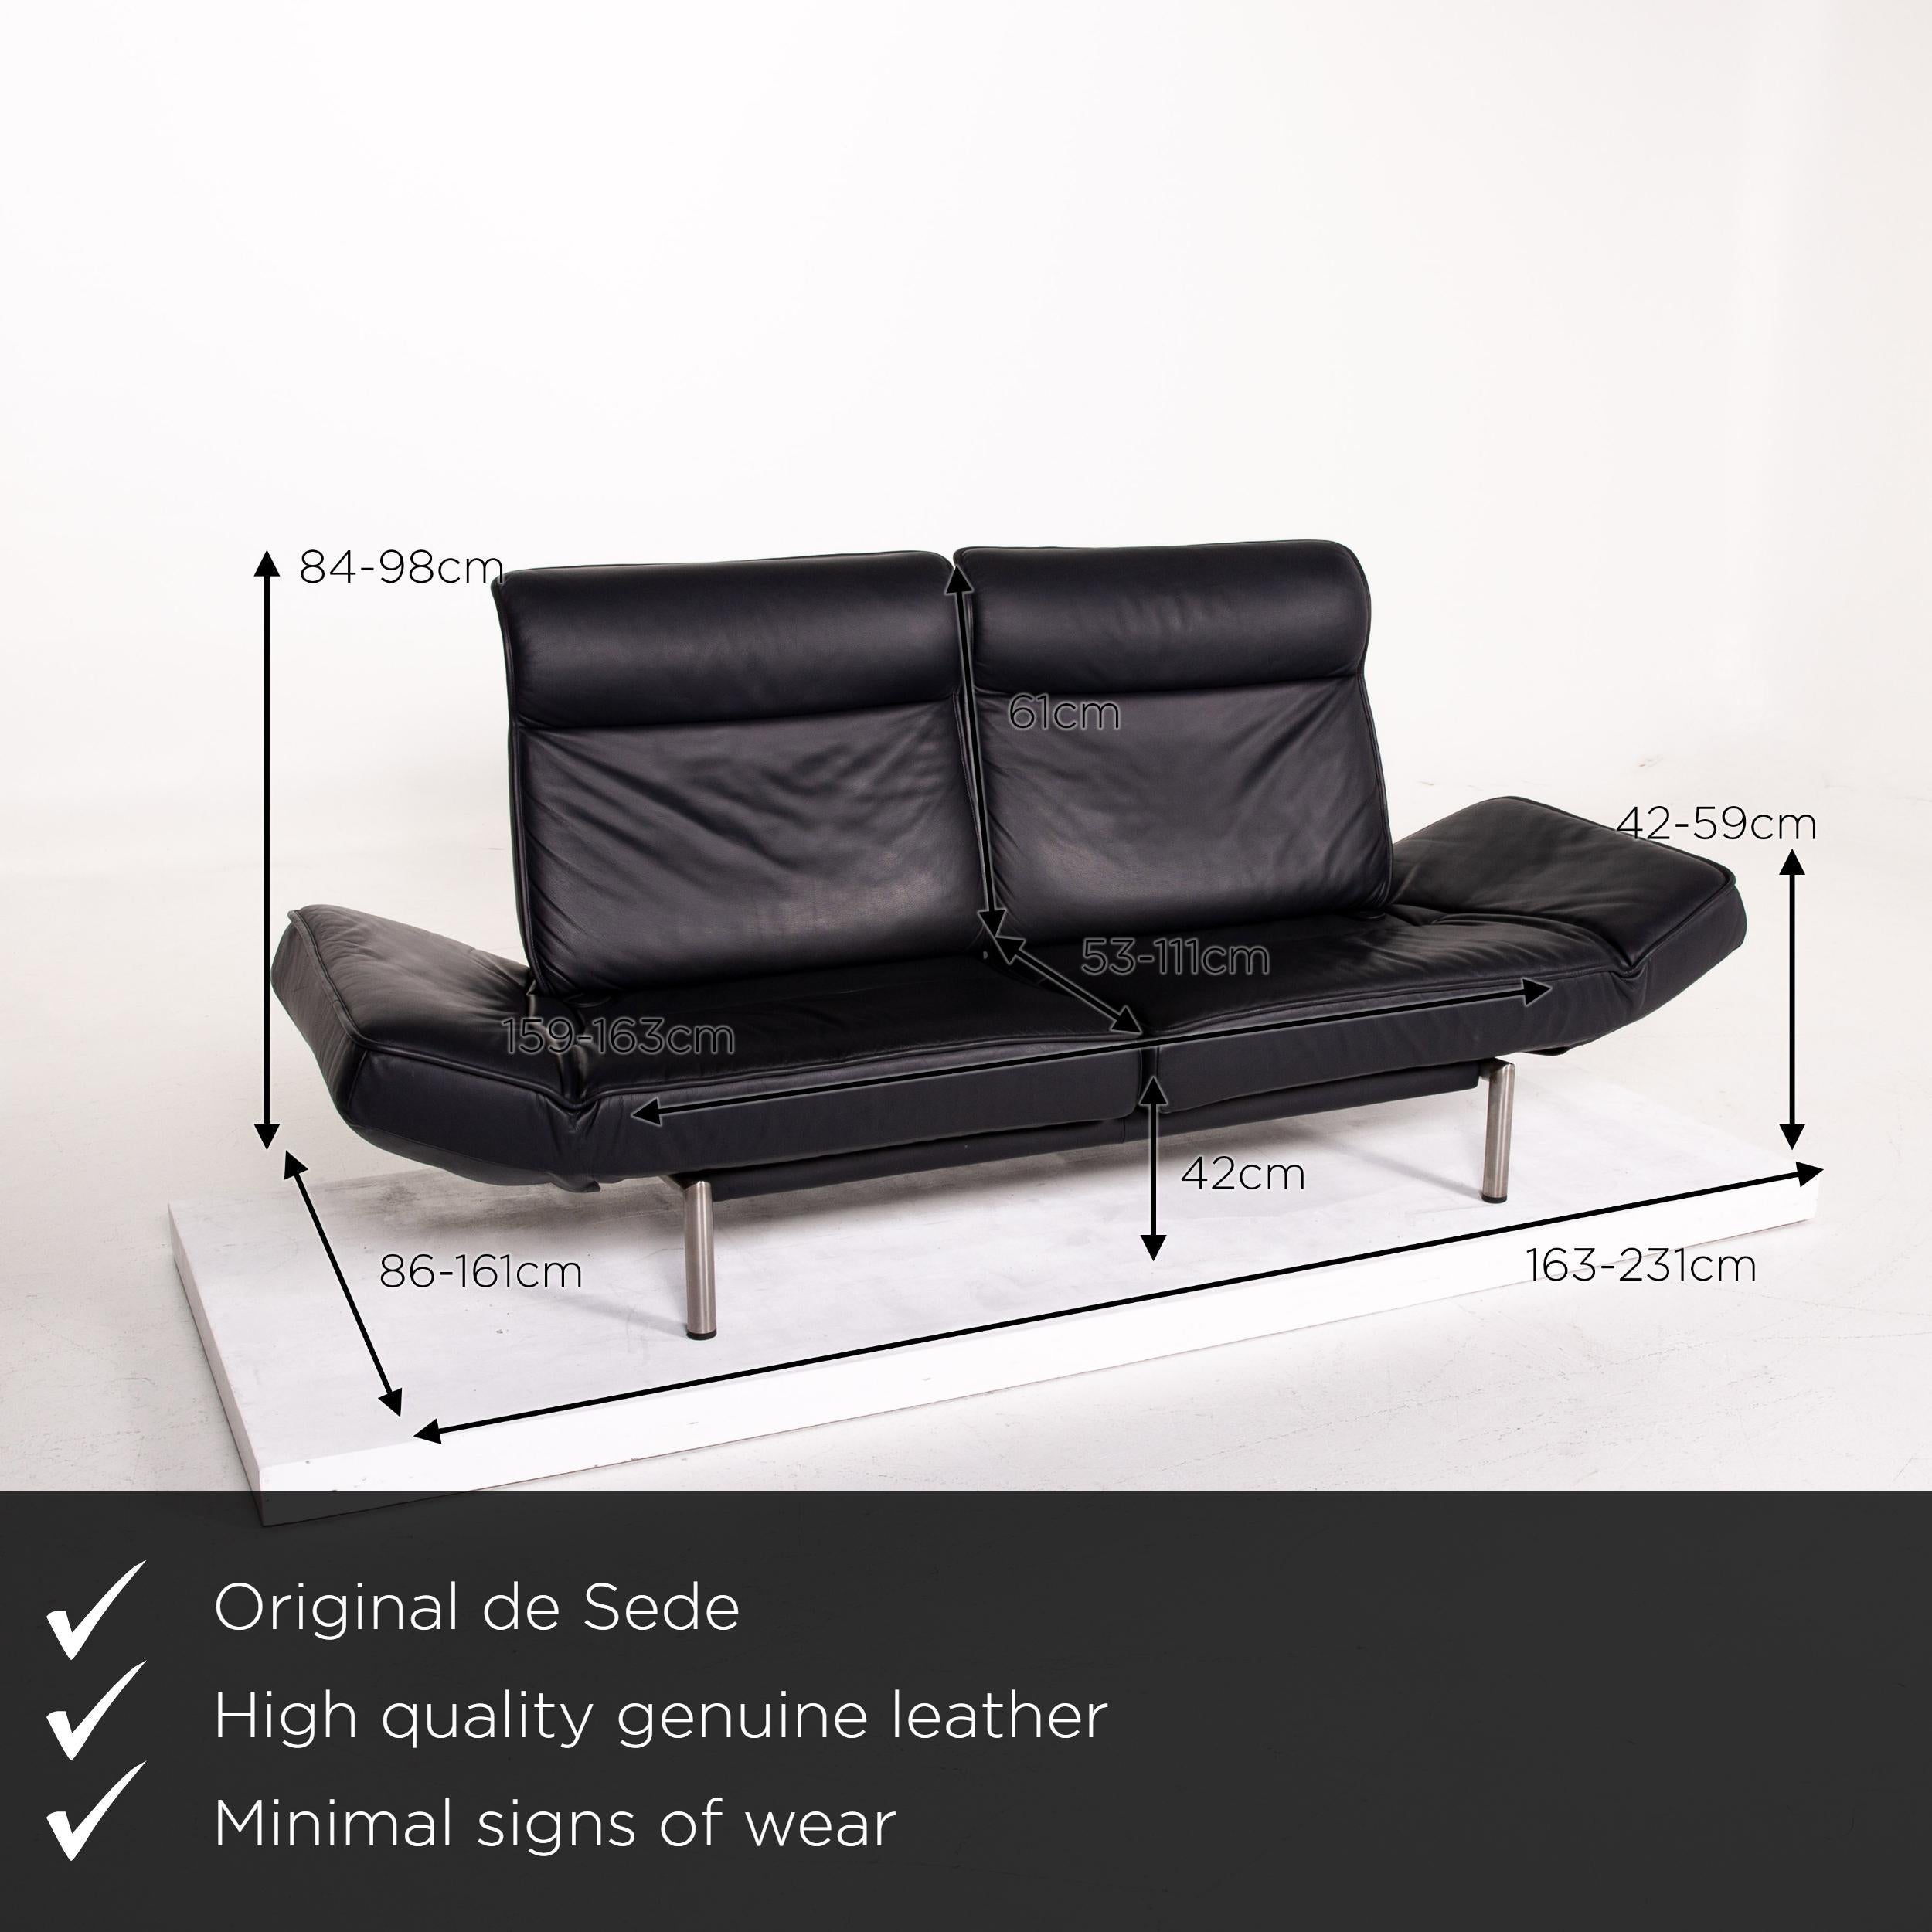 We present to you a de Sede DS 450 leather sofa black two-seat function relax function couch.
   
 

 Product measurements in centimeters:
 

Depth 85
Width 231
Height 98
Seat height 42
Rest height 42
Seat depth 53
Seat width 159
Back